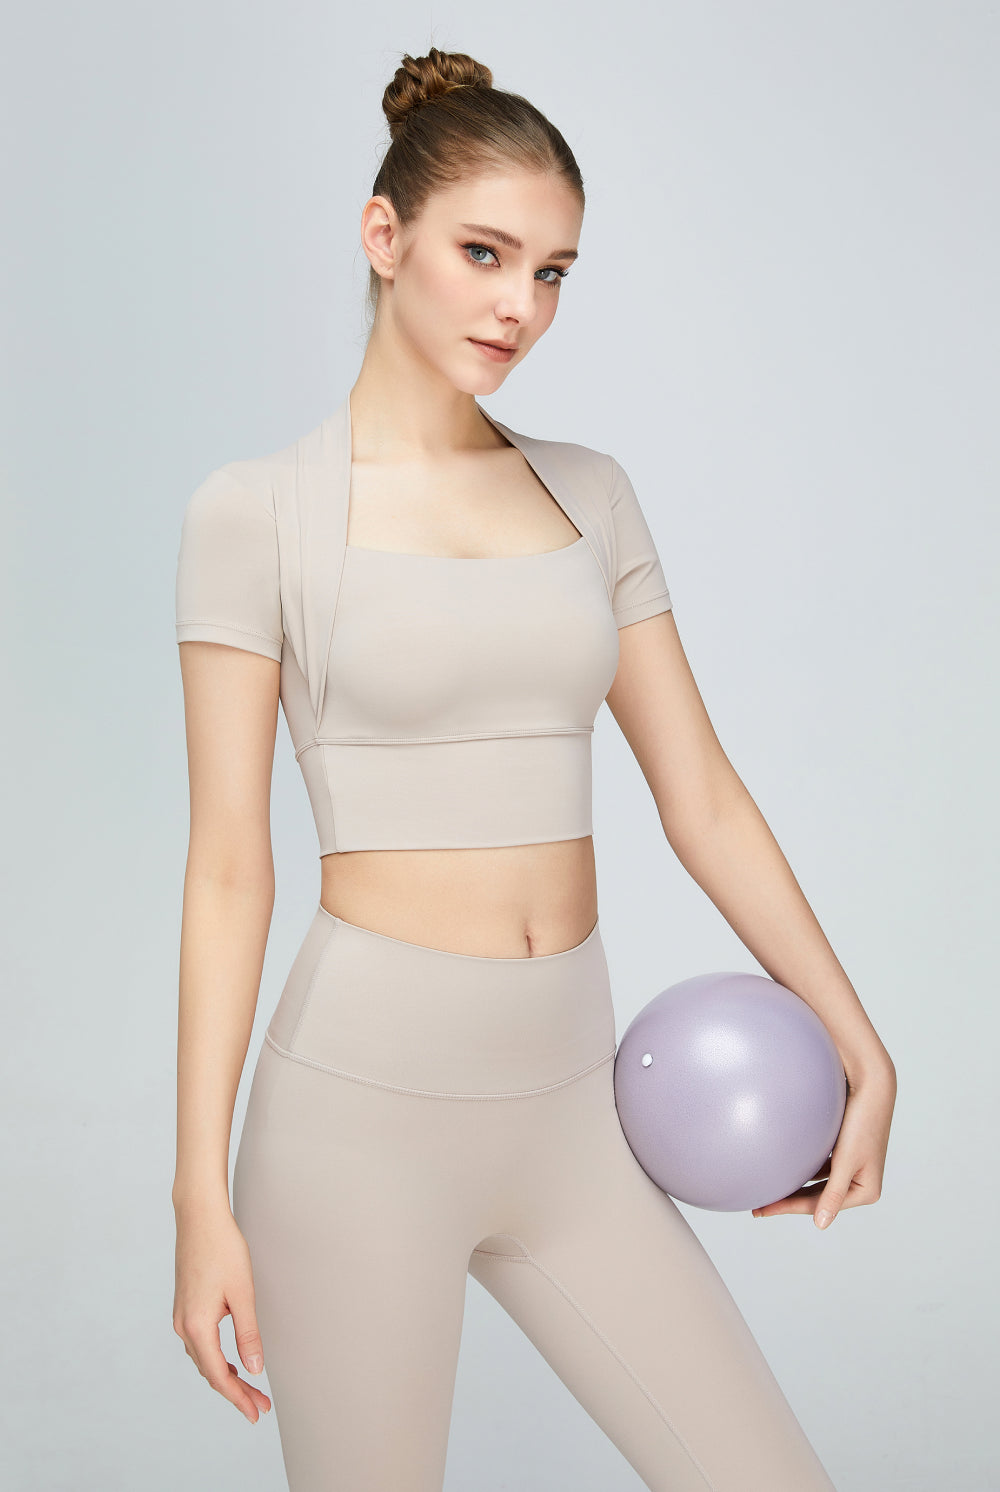 Light Gray Short Sleeve Cropped Sports Top activewear